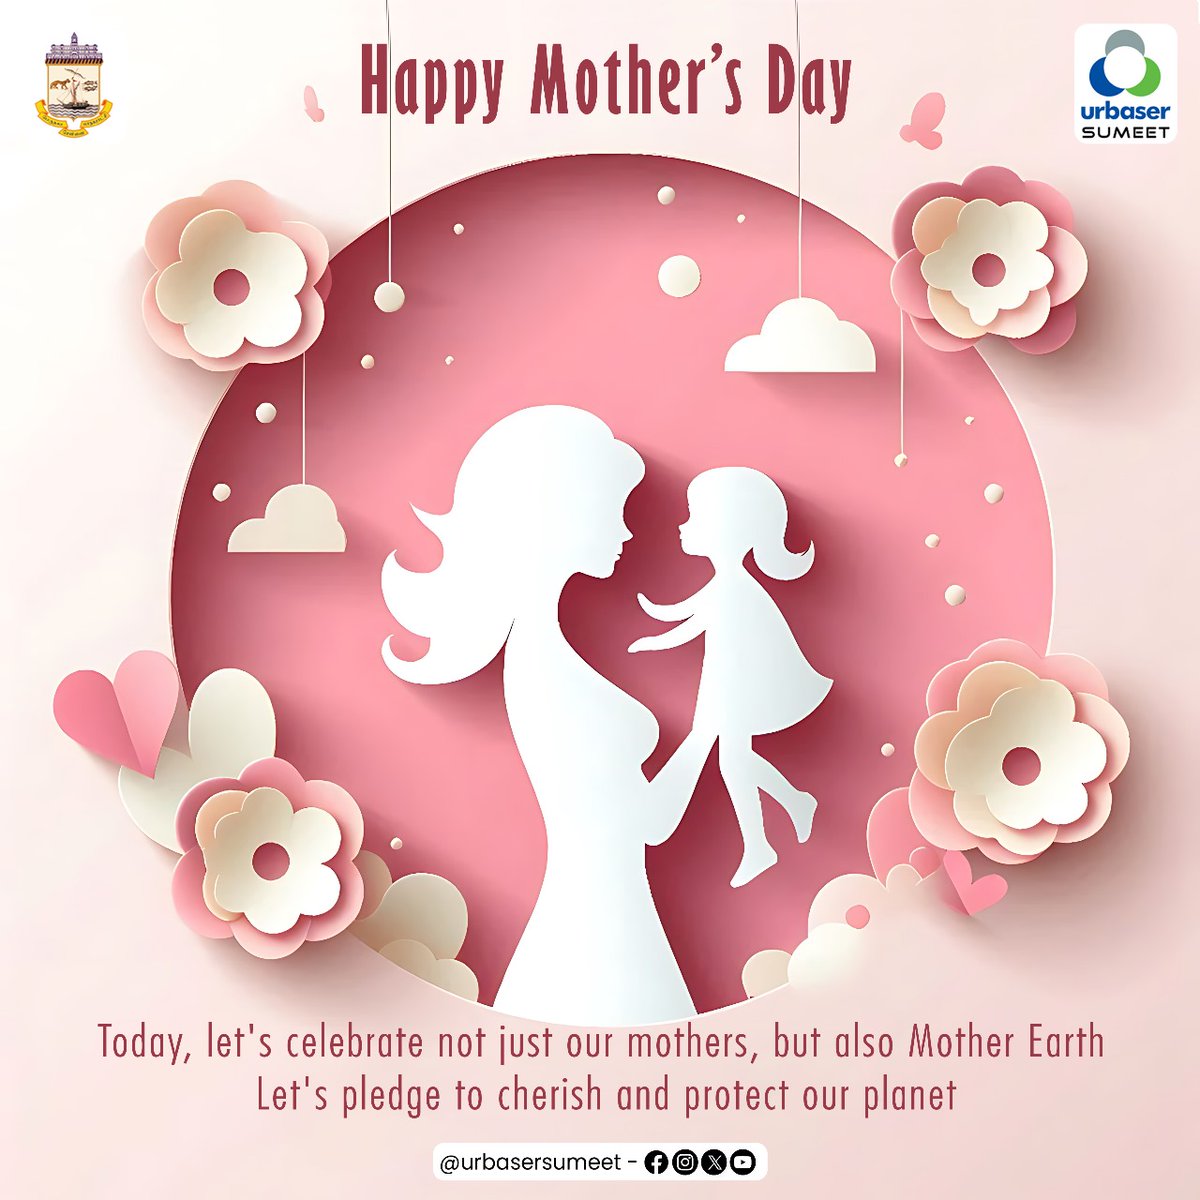 Happy Mother's Day! 🌍 Today, let's honor not only our incredible mothers but also Mother Earth. Let's pledge to cherish and protect our planet for generations to come. #MothersDay #ProtectOurPlanet #UrbaserSumeet #I_can_segregate #DoNotLitter #WasteSegregation